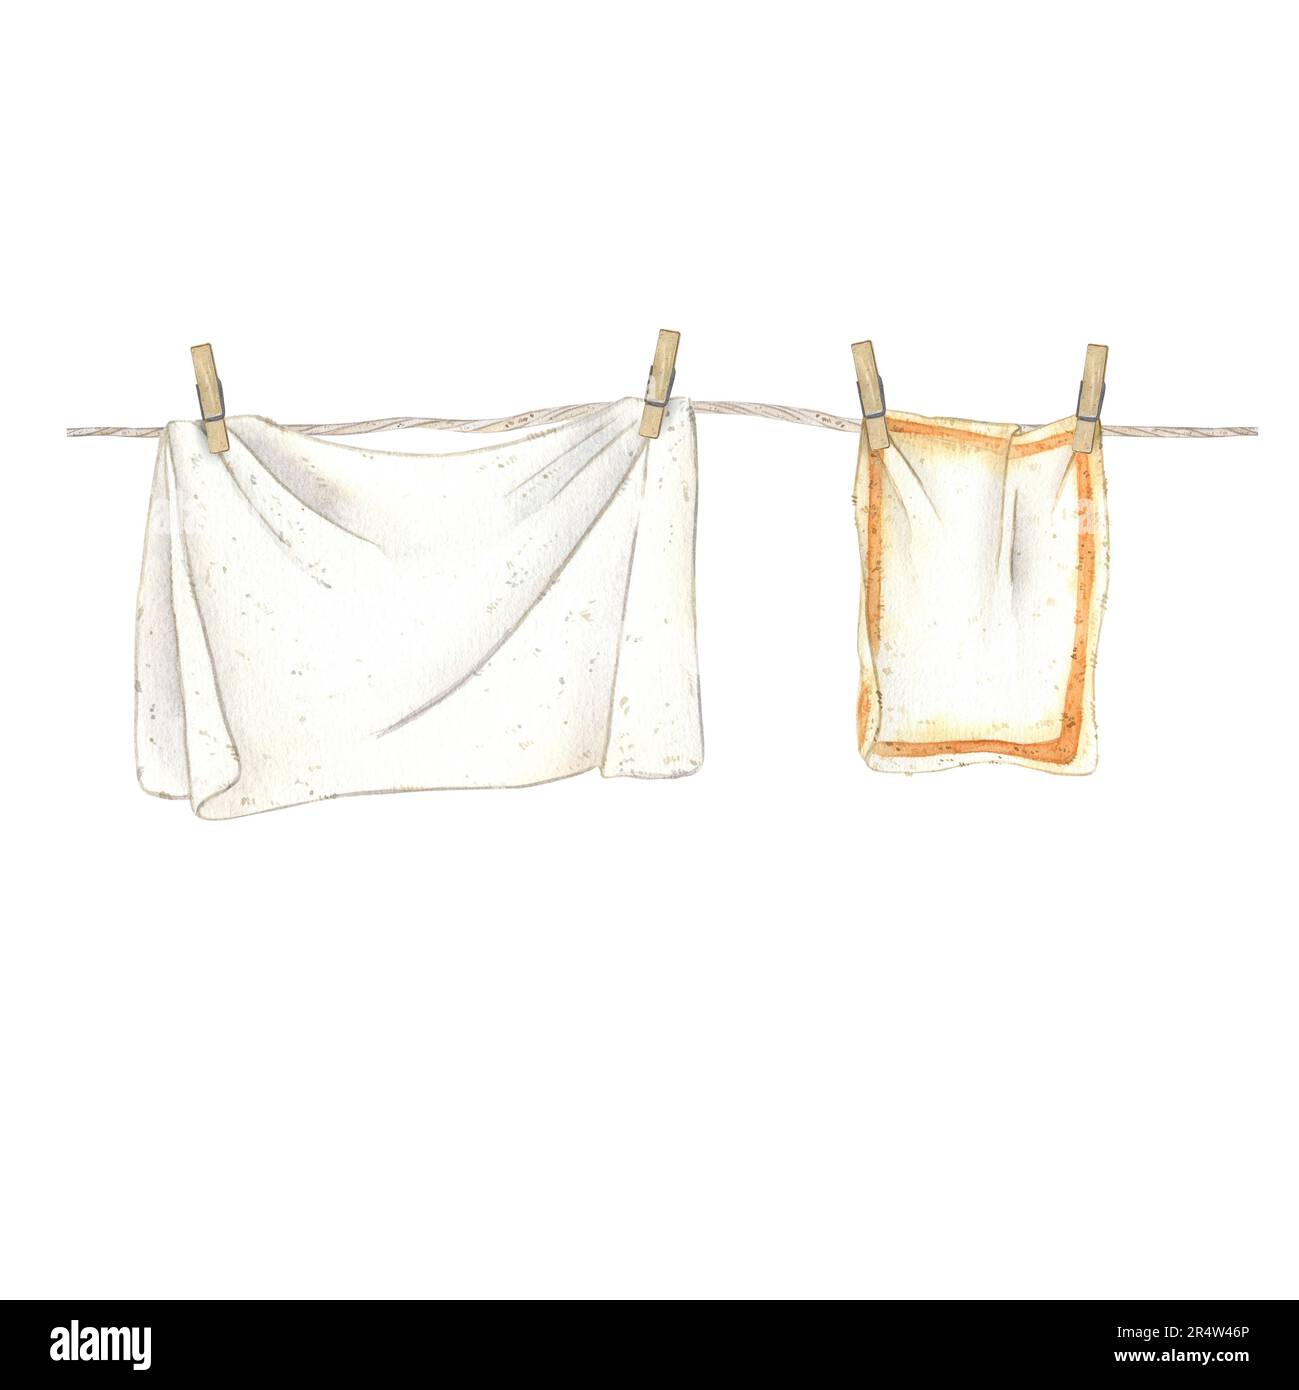 A white clothesline with clean clothes hanging on clothespins